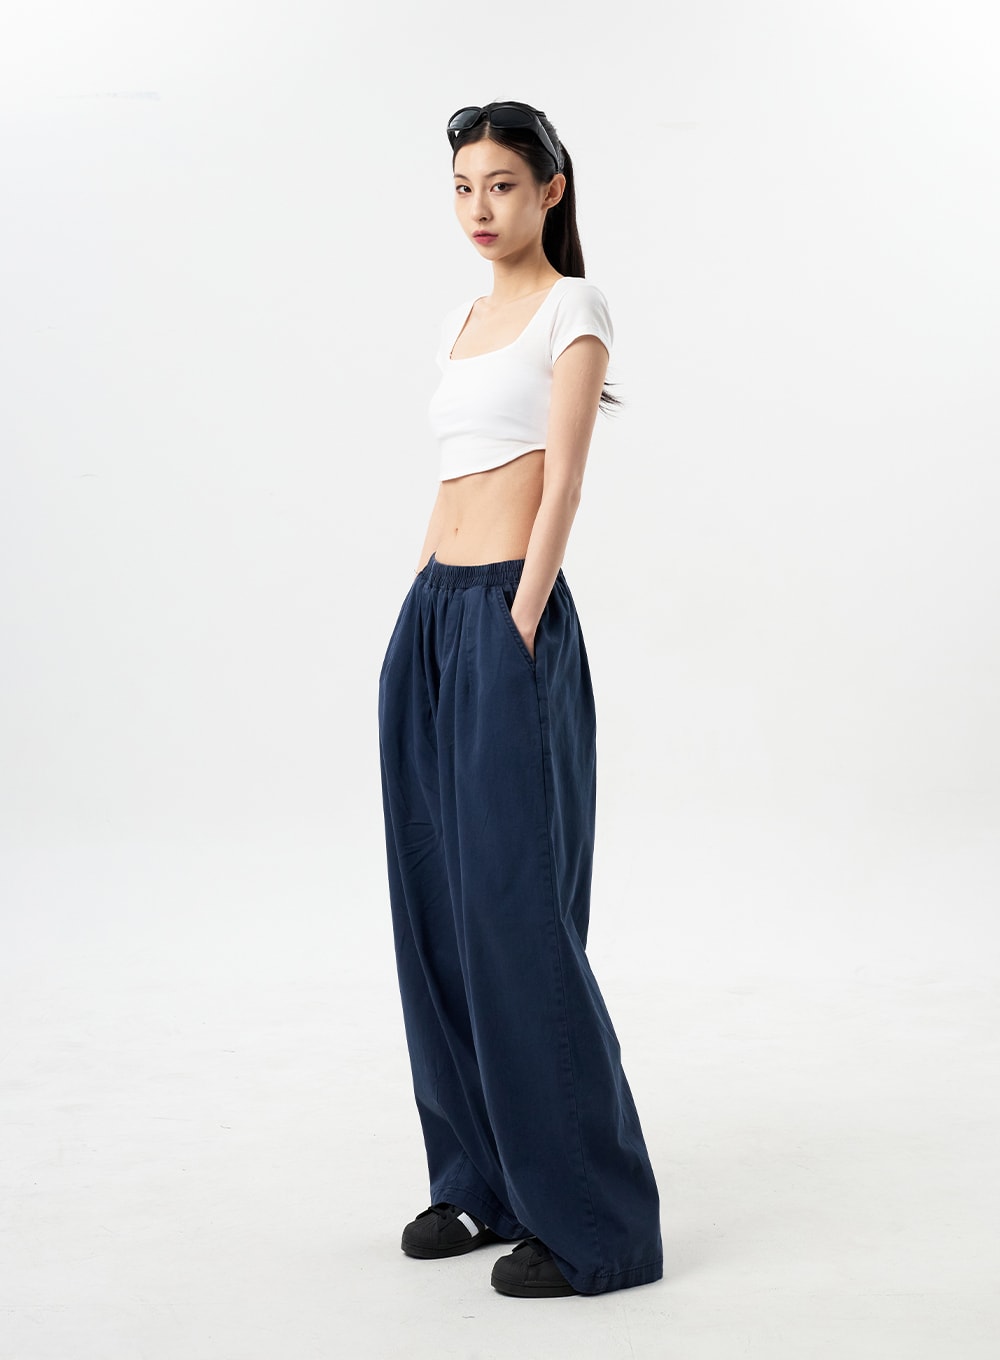 Square Neck Cropped Tee CY312